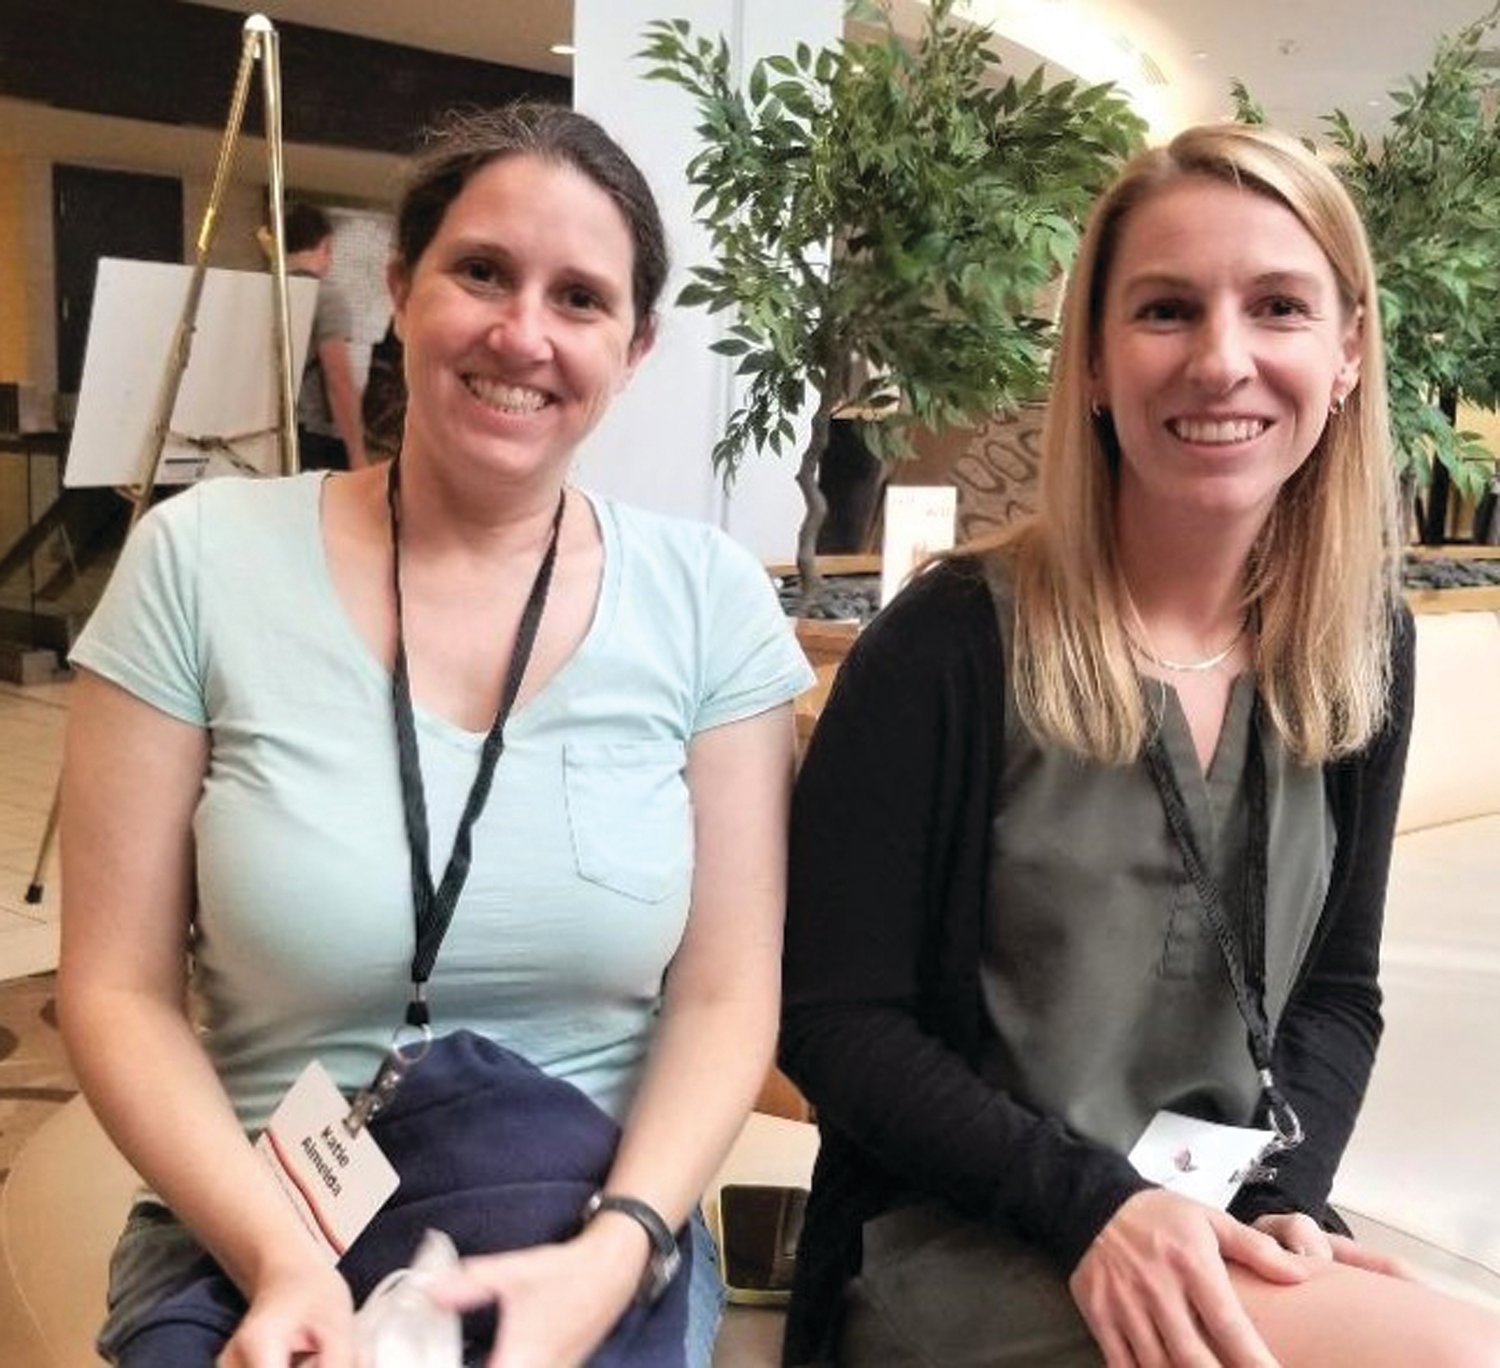 WORKSHOP: Katie Almeida of Town Dock, South Kingstown, RI and Kate Masury of Eating with the Ecosystem, Wakefield, RI take a break at last week’s climate scenario planning workshop in Virginia. (Submitted photos)